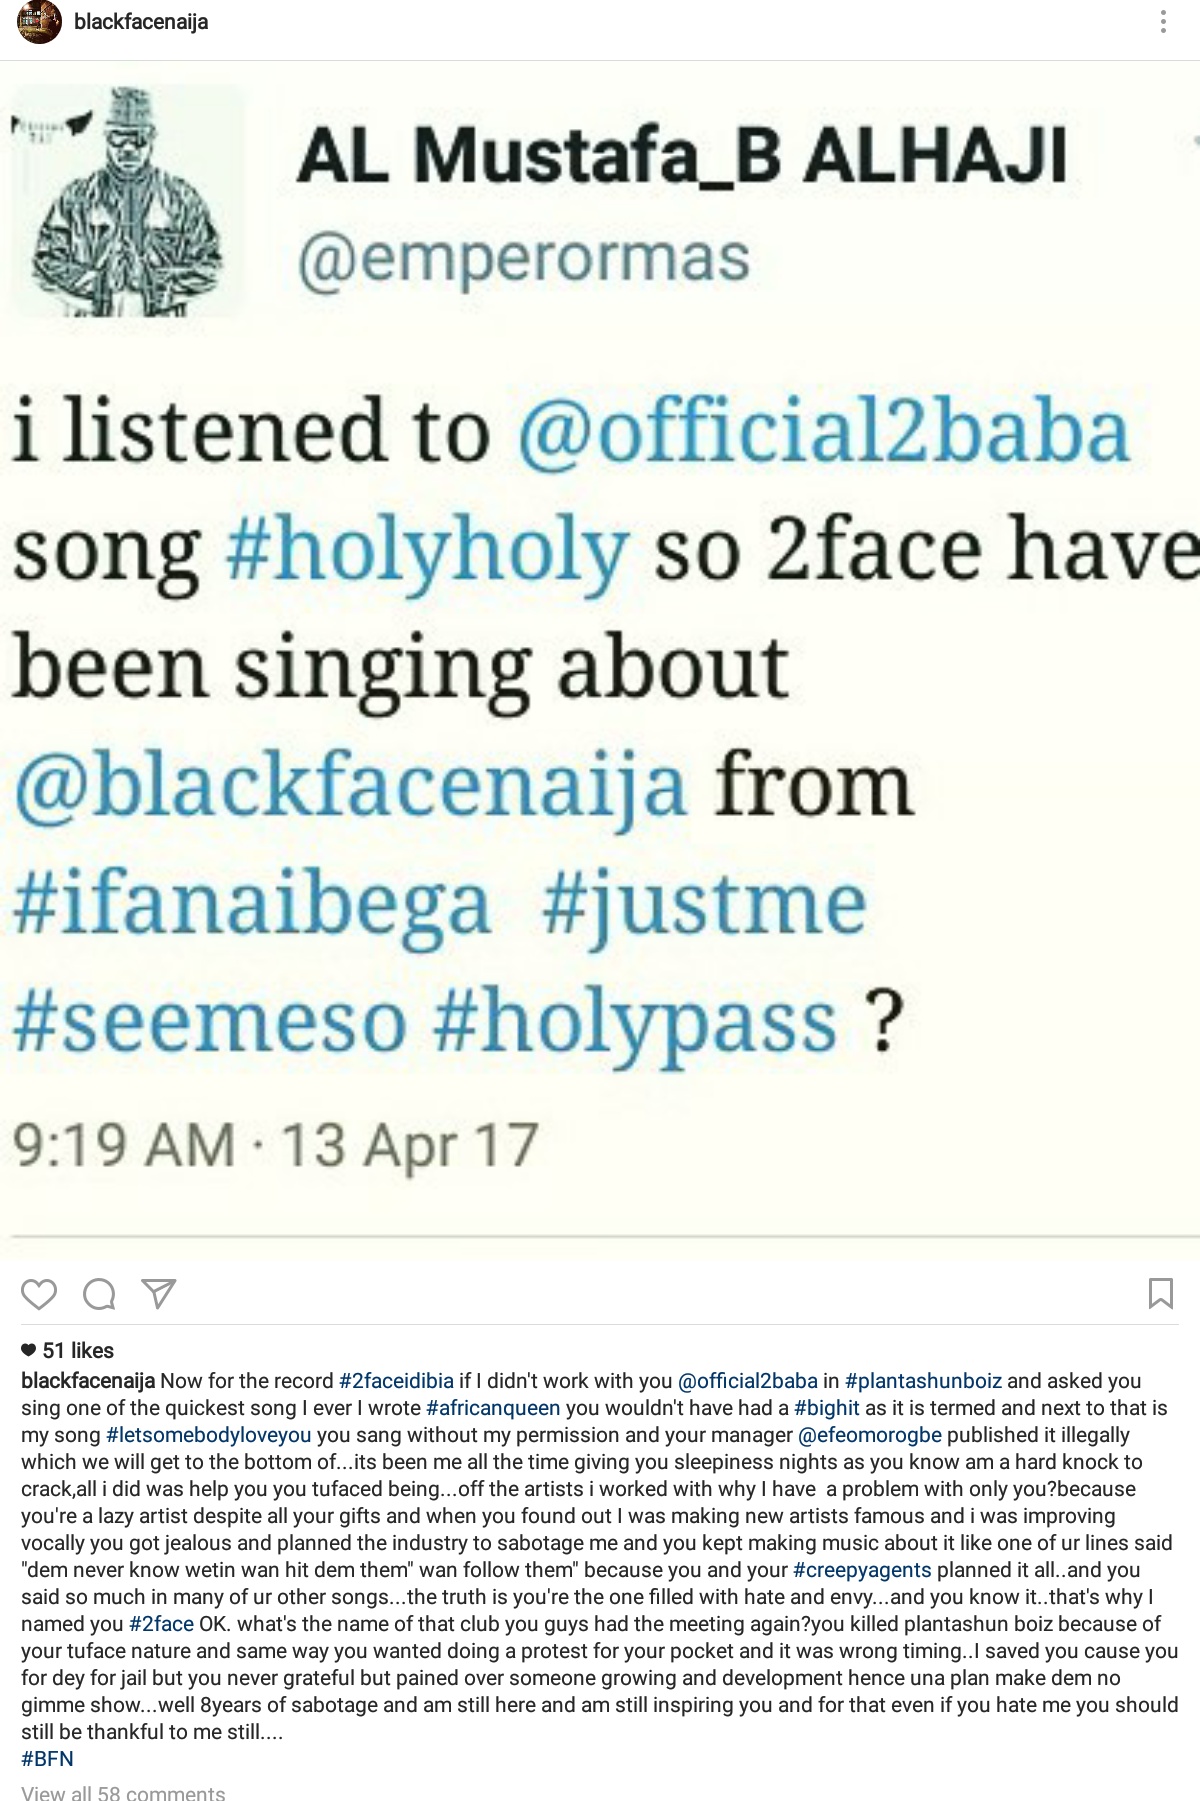 ALL I DID WAS HELP YOU 'you tufaced being' Then Calls Him LAZY ARTIST DESPITE ALL YOUR GIFTS — Blackface Attacks Tuface 2